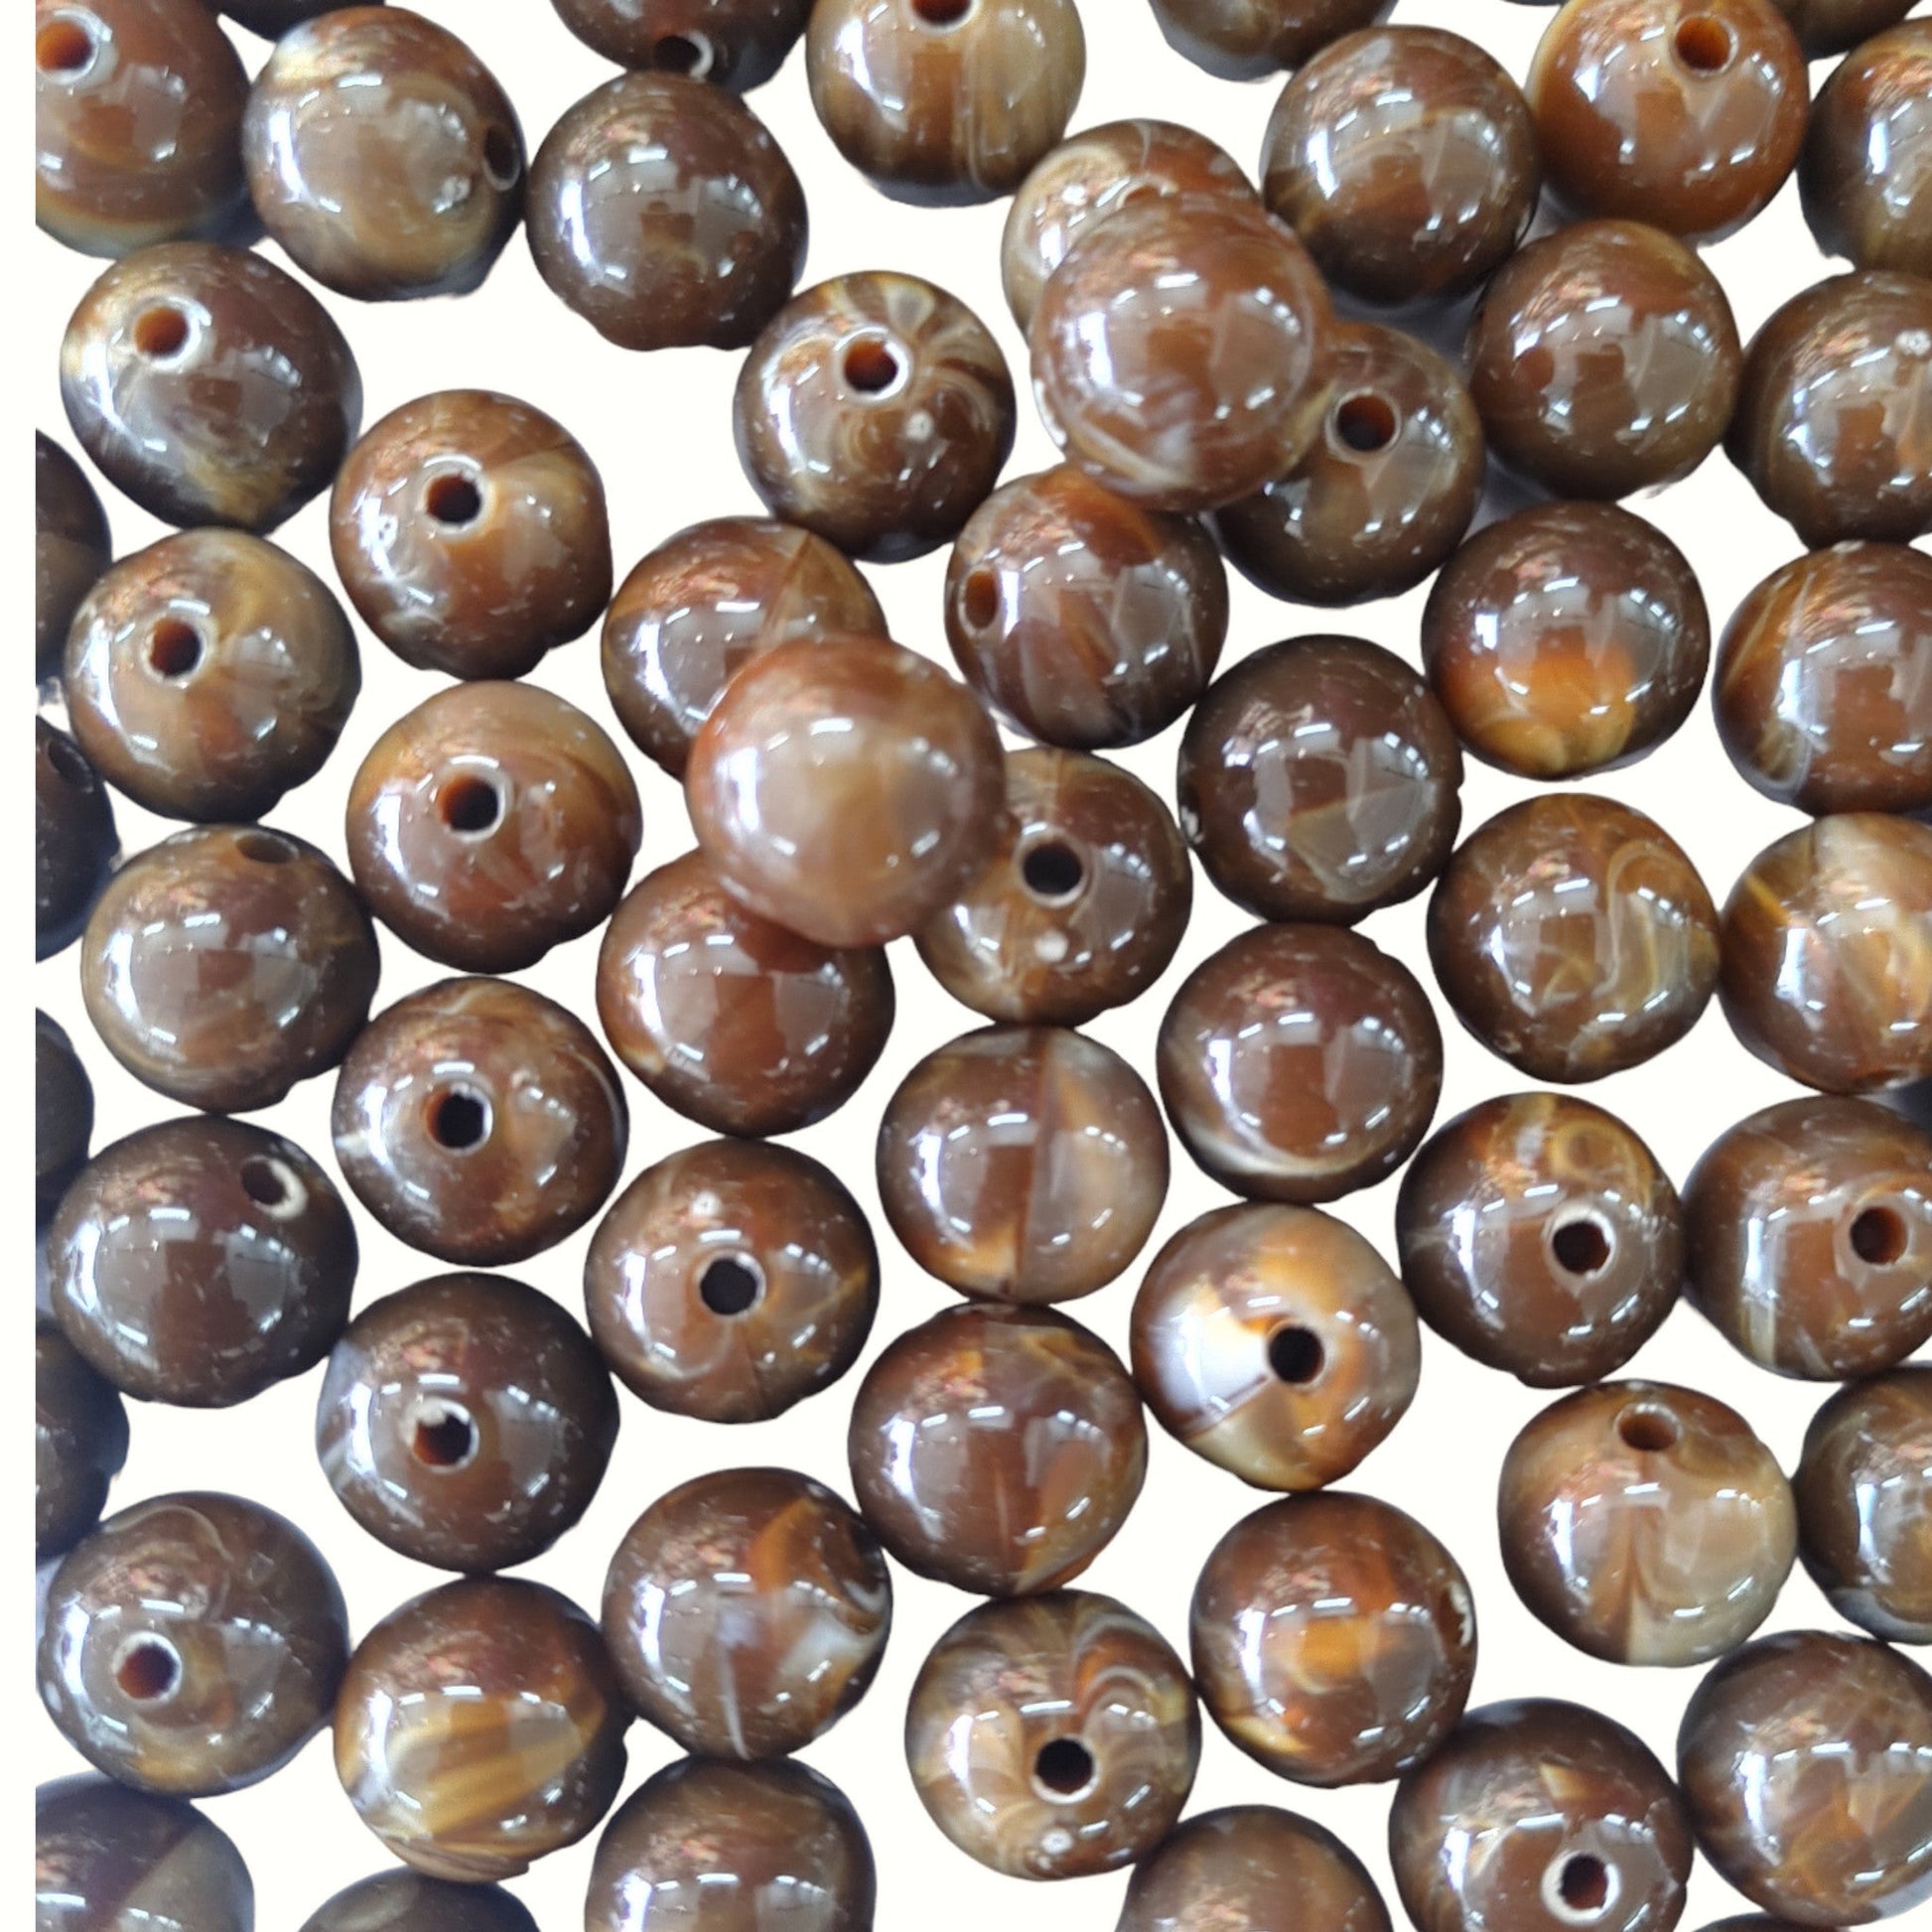 Indian Petals Ball Shaped Color Marble Beads Ideal for Jewelry designing and Craft Making or Decor